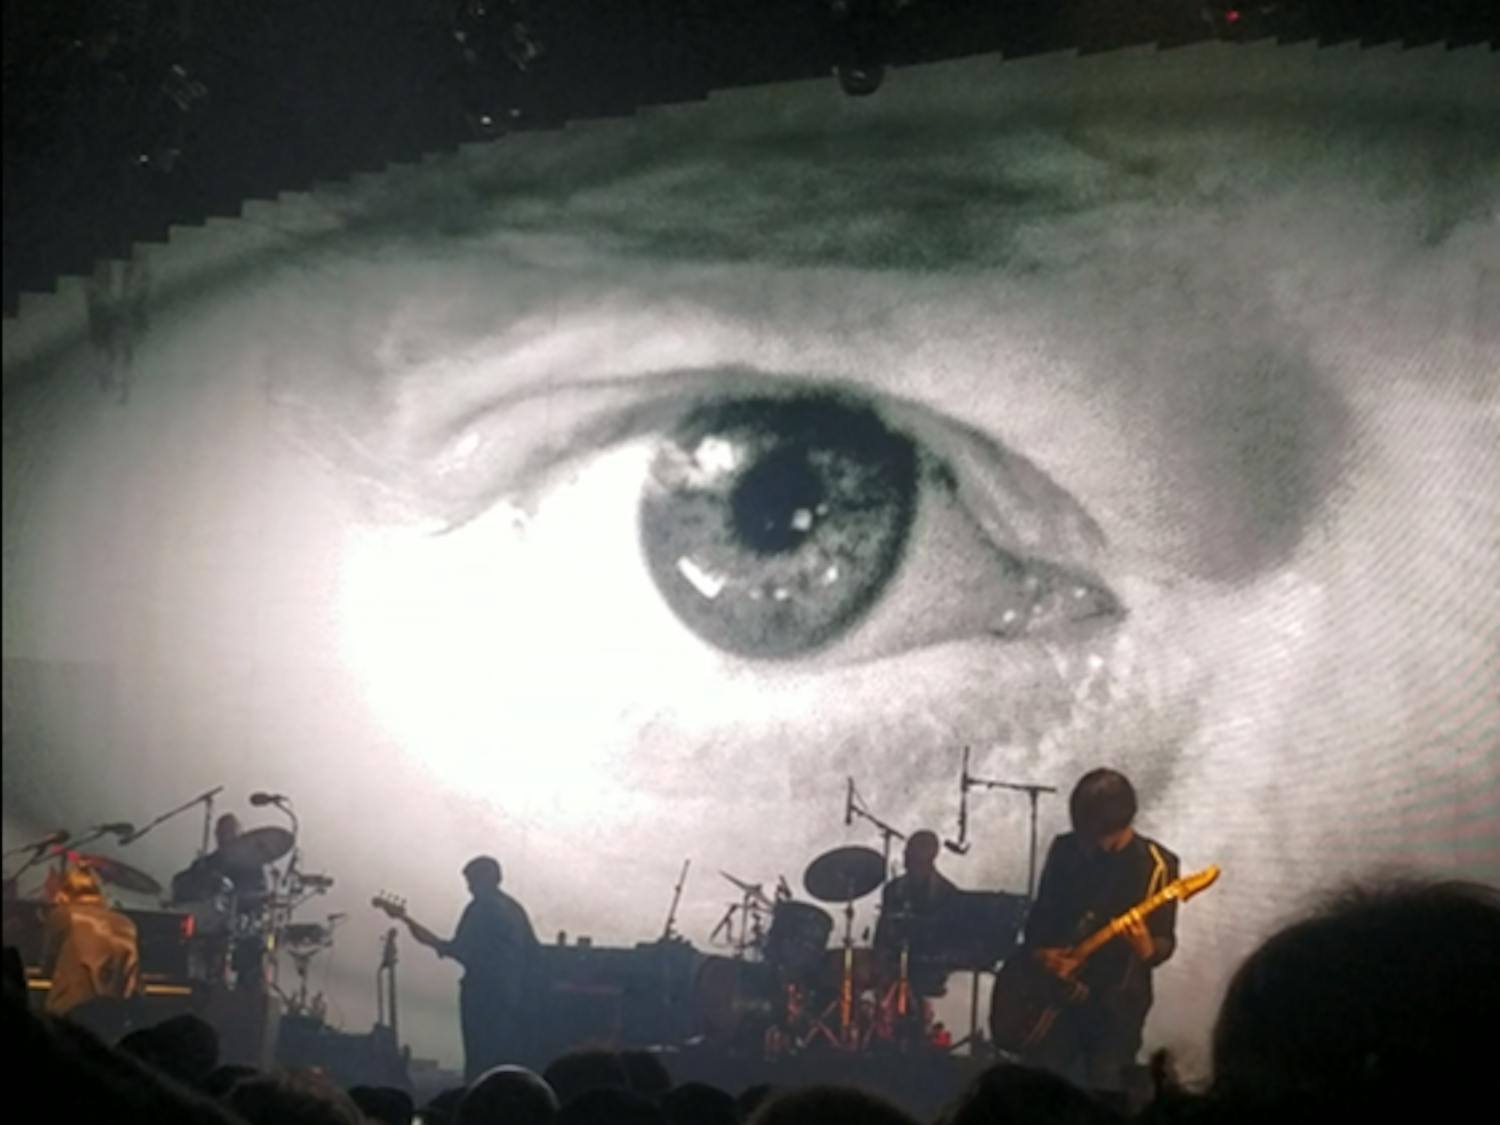 Thom Yorke's eye gazes into the crowd of the Santa Barbara Bowl during Radiohead's encore performance of "You and Whose Army?"